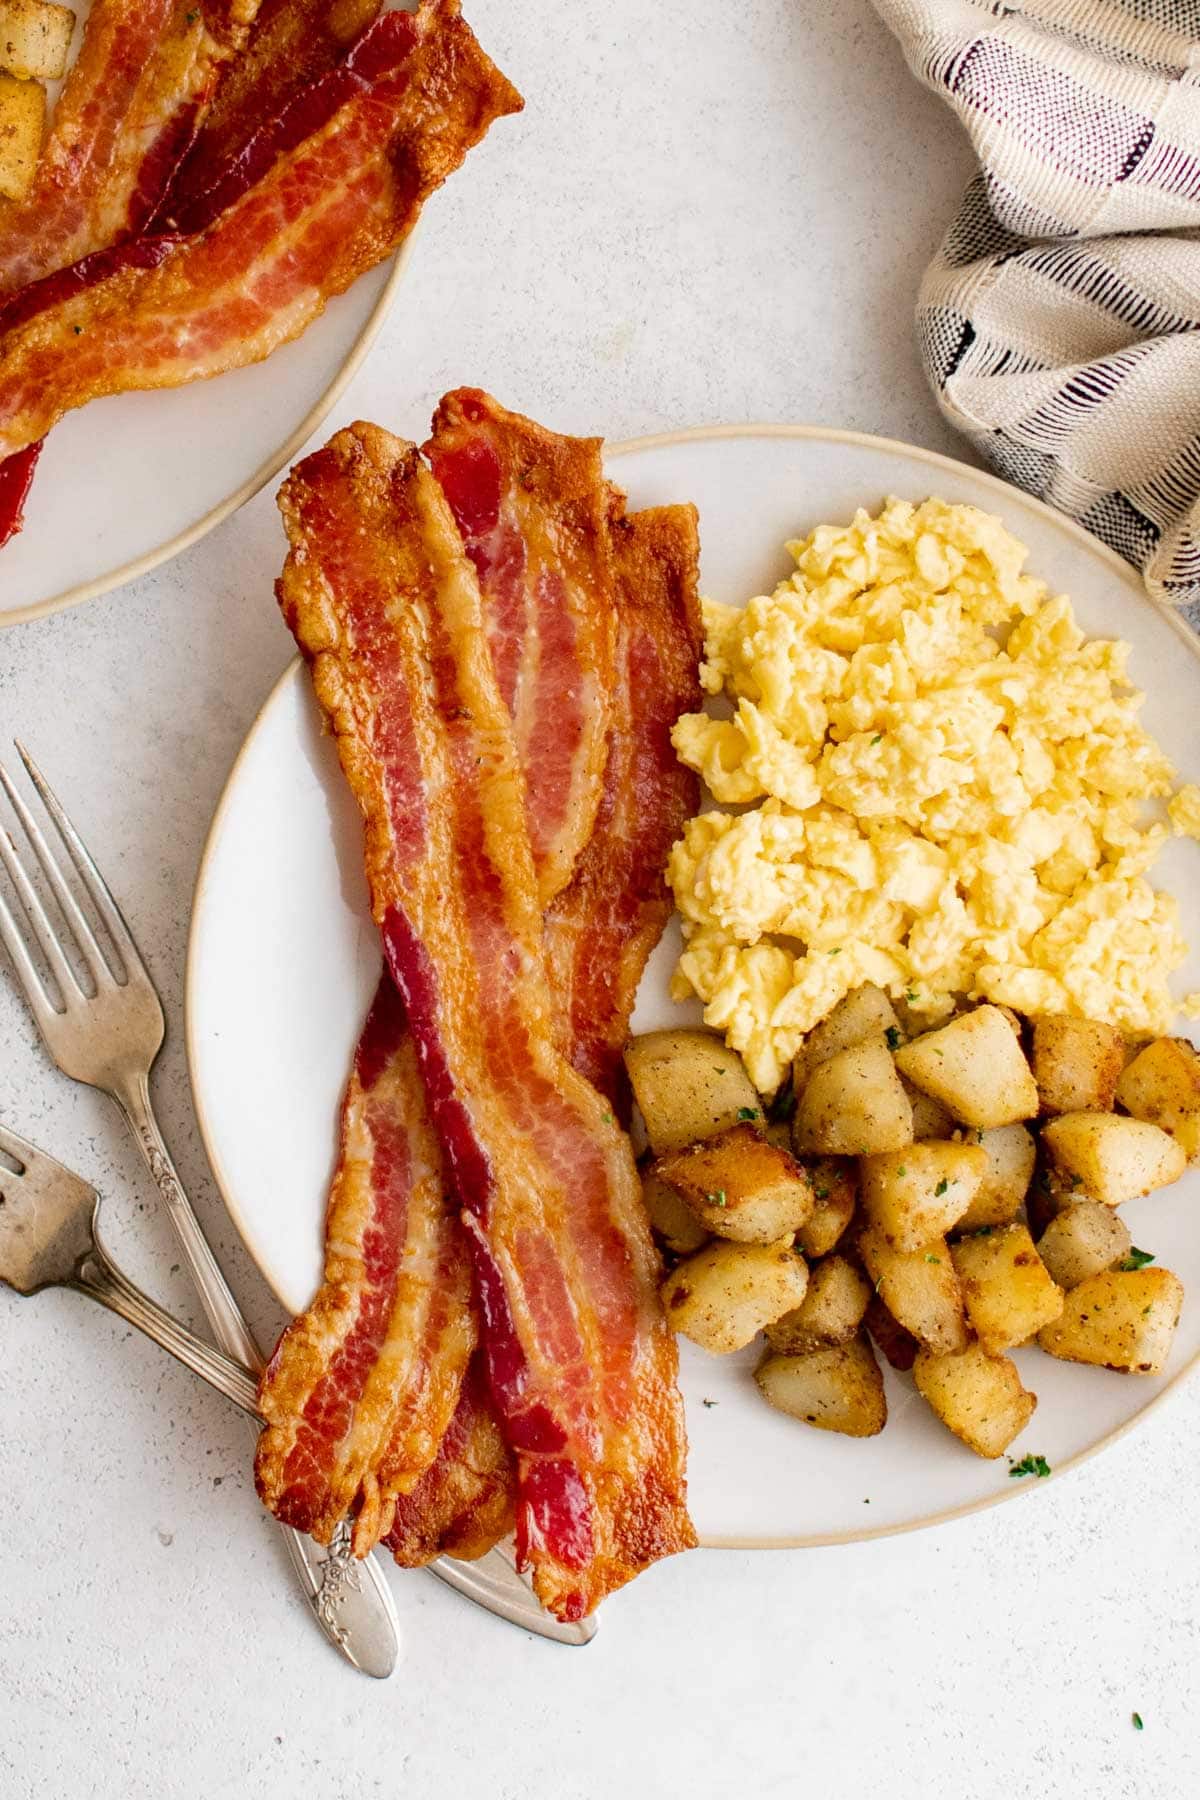 Bacon, scrambled eggs and diced potatoes on a plate with a fork.